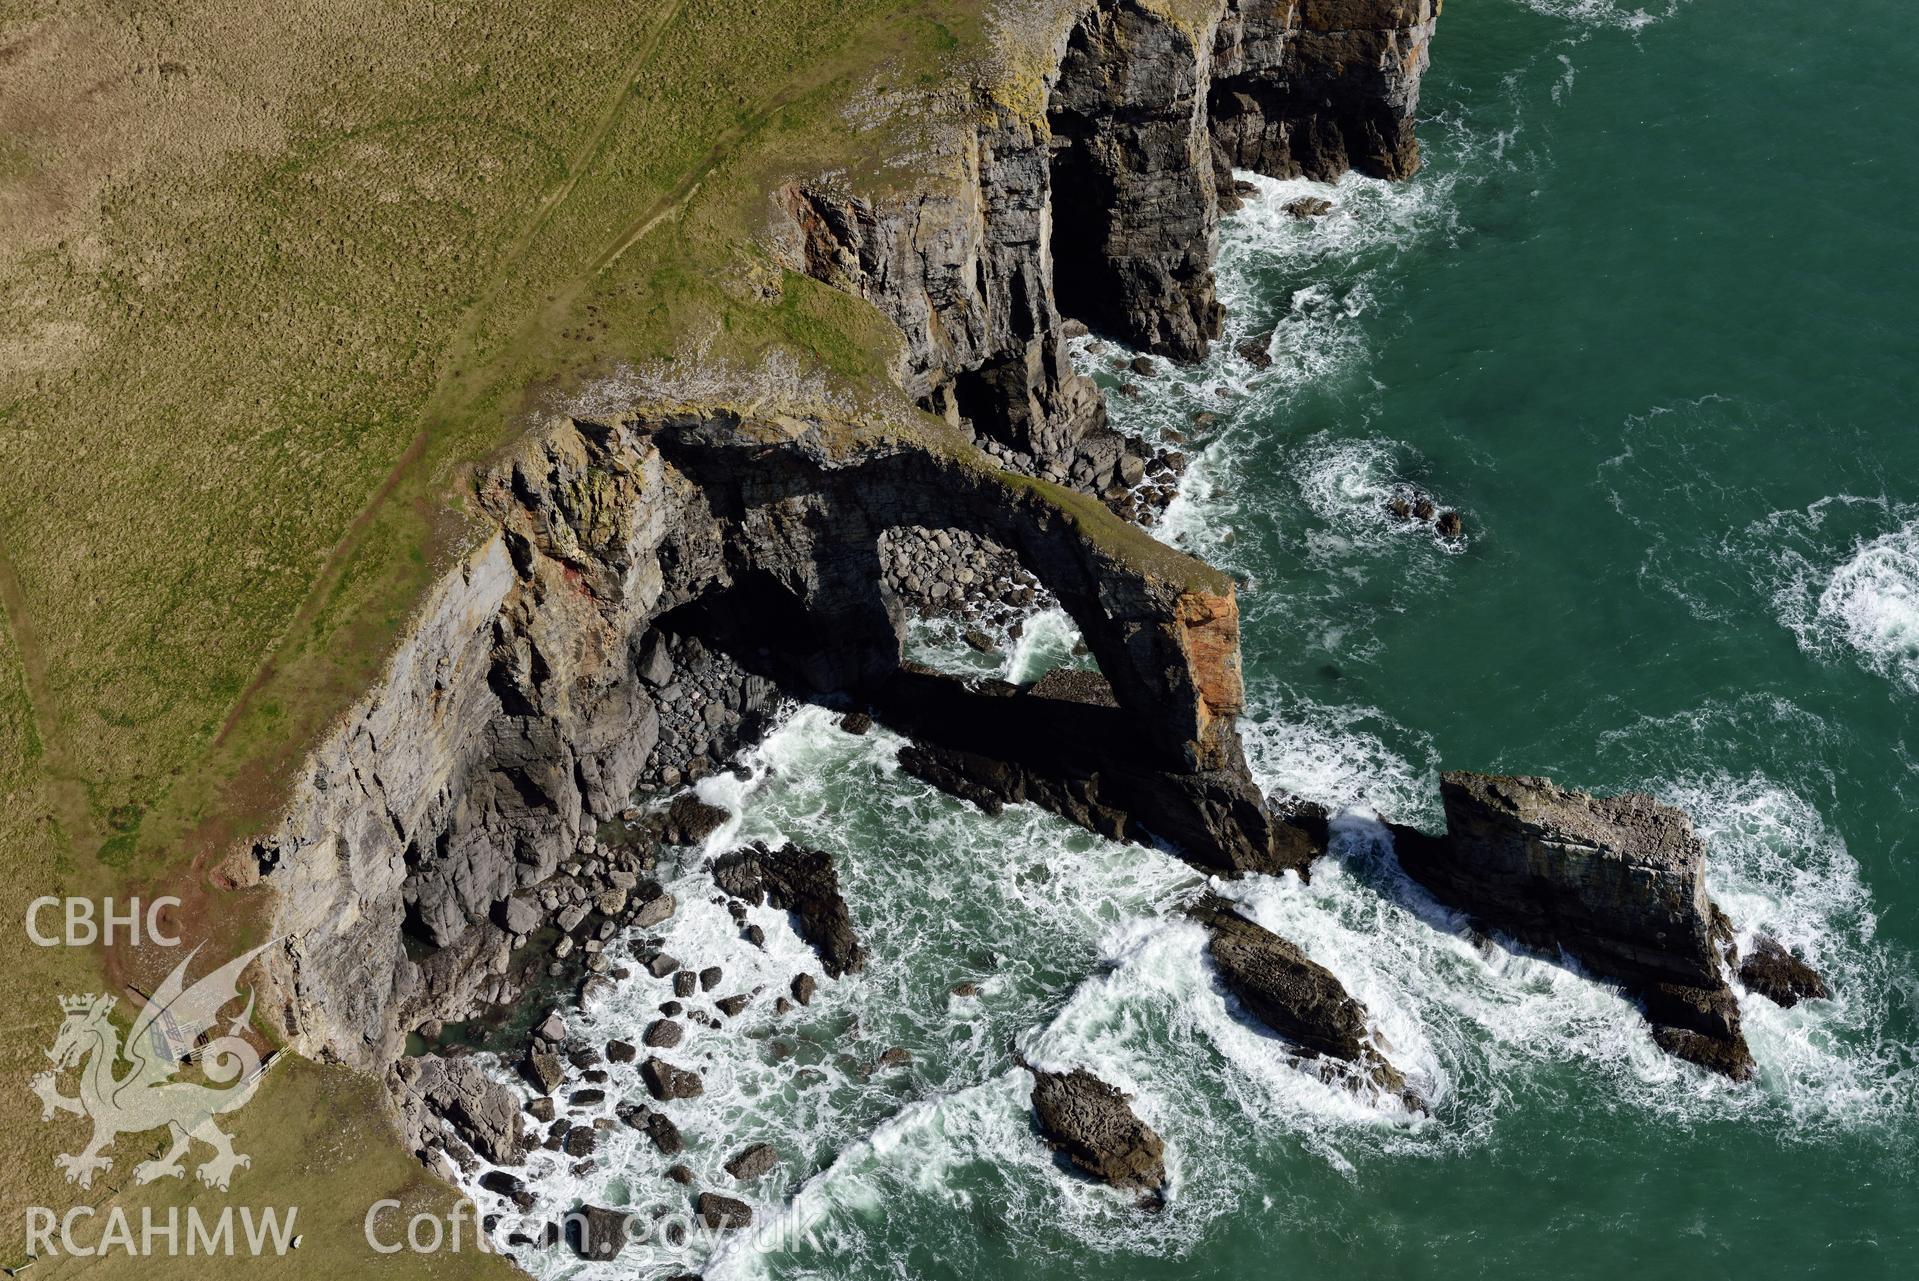 The Green Bridge of Wales, following the October 2017 partial collapse. Baseline aerial reconnaissance survey for the CHERISH Project. ? Crown: CHERISH PROJECT 2018. Produced with EU funds through the Ireland Wales Co-operation Programme 2014-2020. All material made freely available through the Open Government Licence.